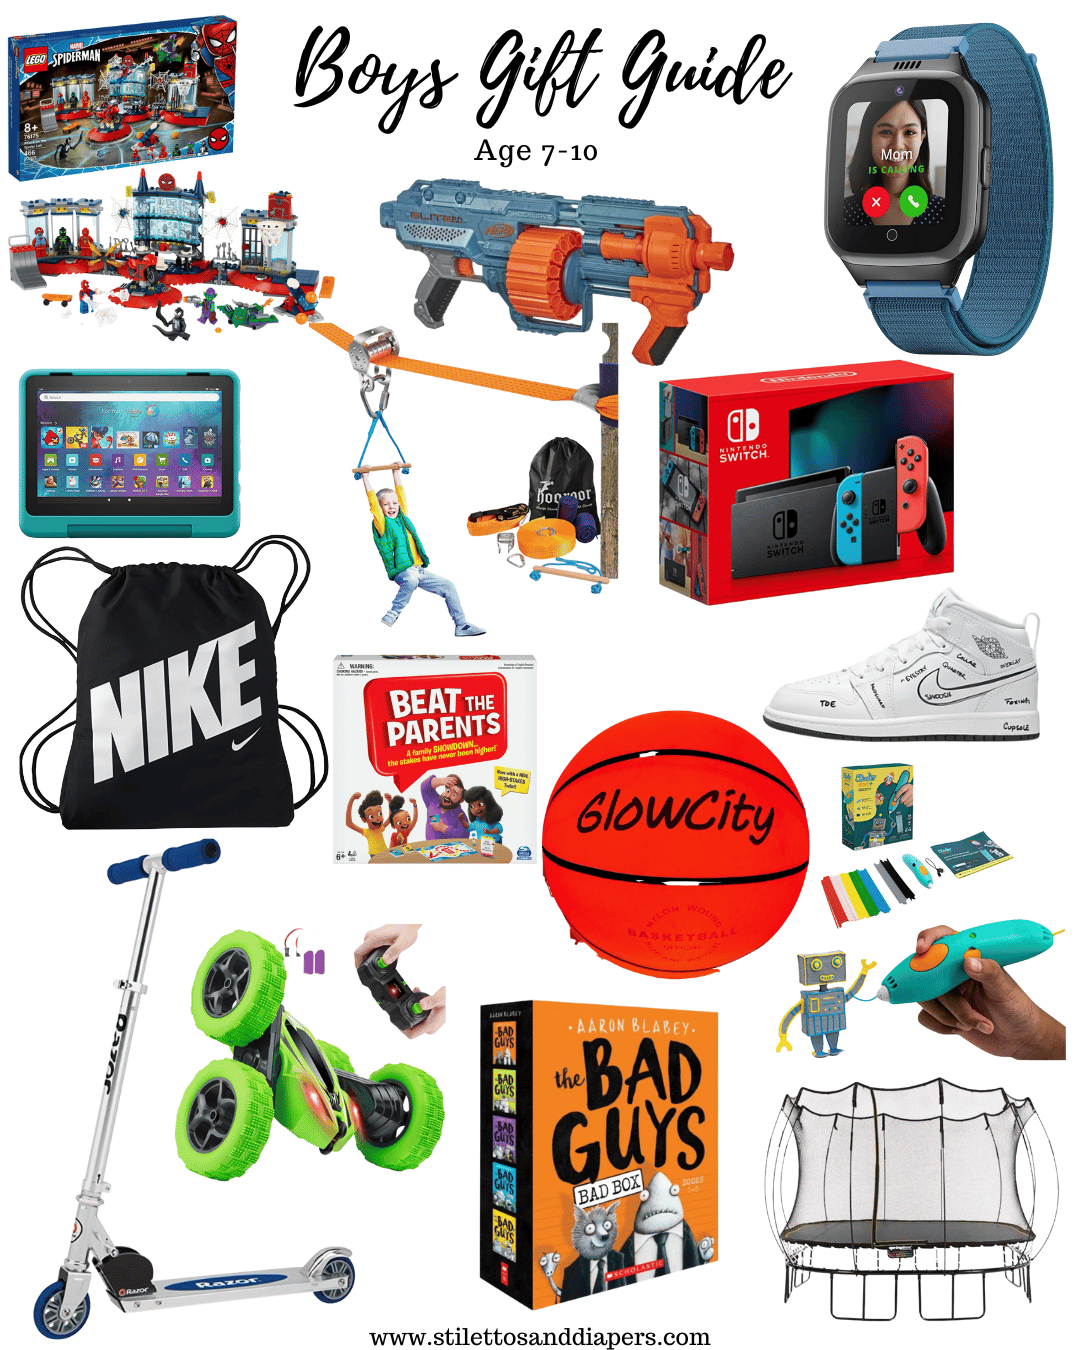 Complete Boys Gift Guide 2022, tween boy gift ideas, boys 7-10 gift ideas, Stilettos and Diapers